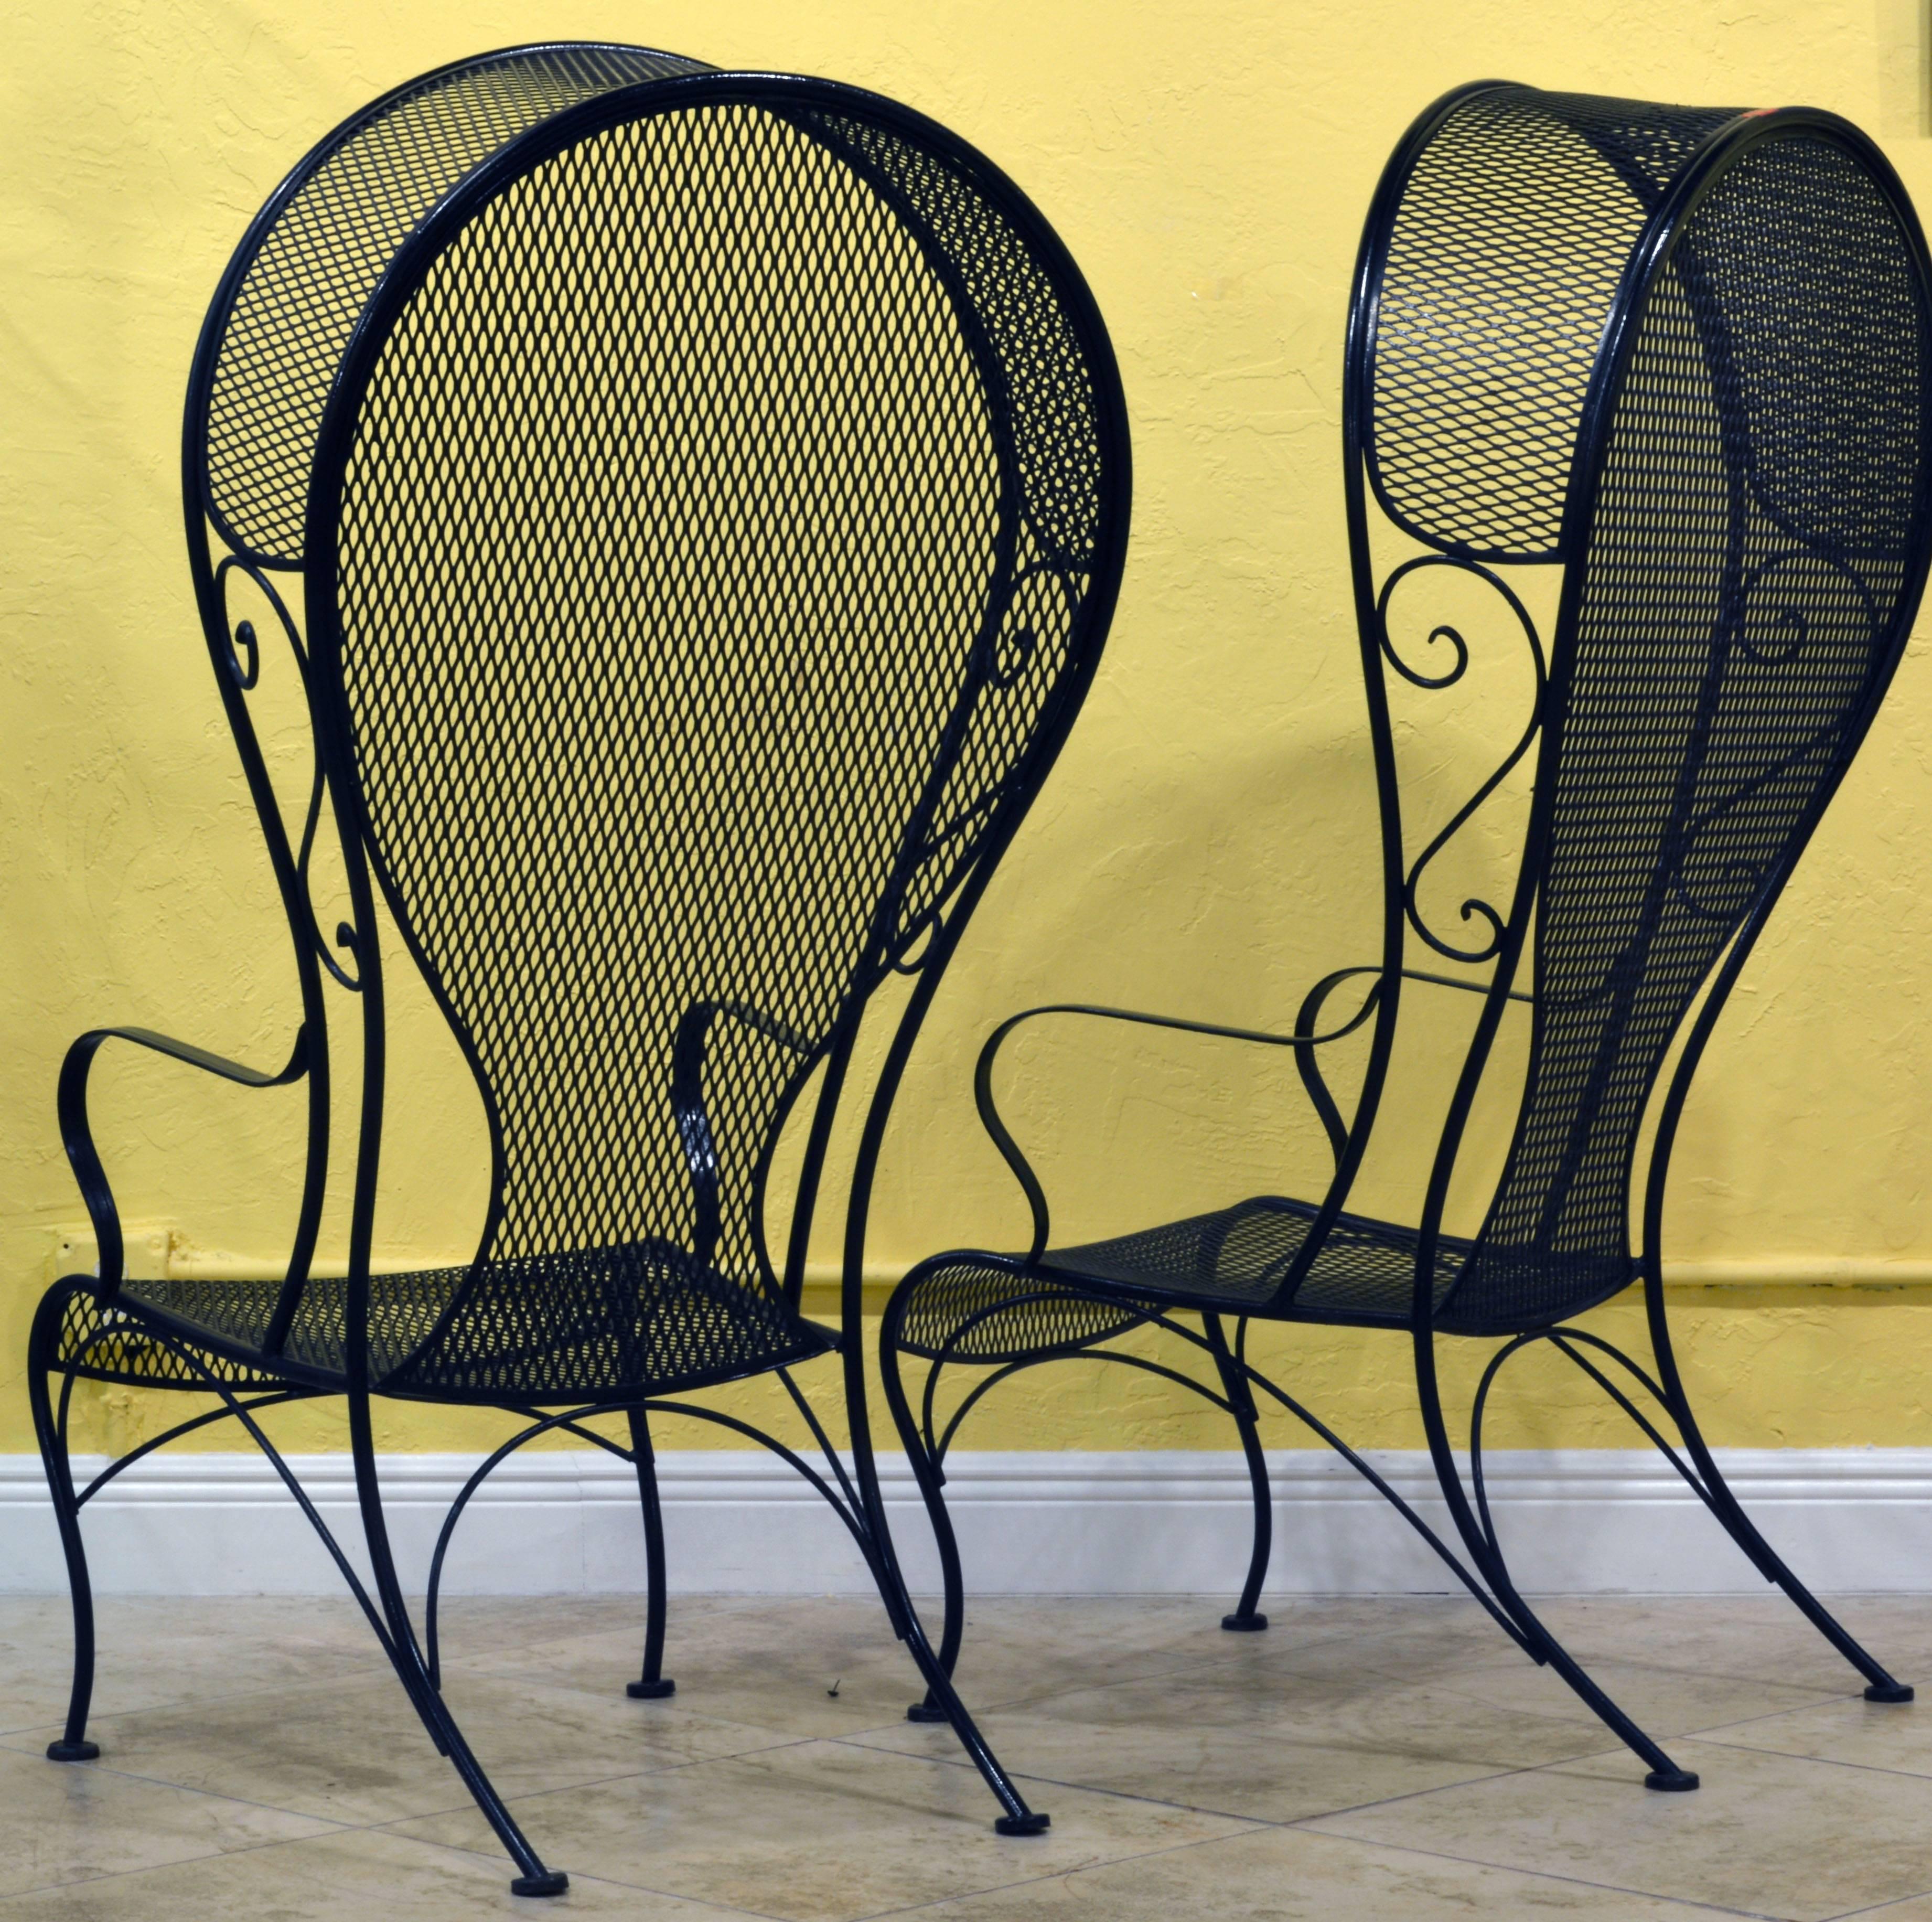 These chairs from the 1960s feature the distinct design and craftsmanship of Woodard. Elegant and inviting lines combined with the lightness of the mesh creates a truly sculptural look. That would also compliment an interior room.